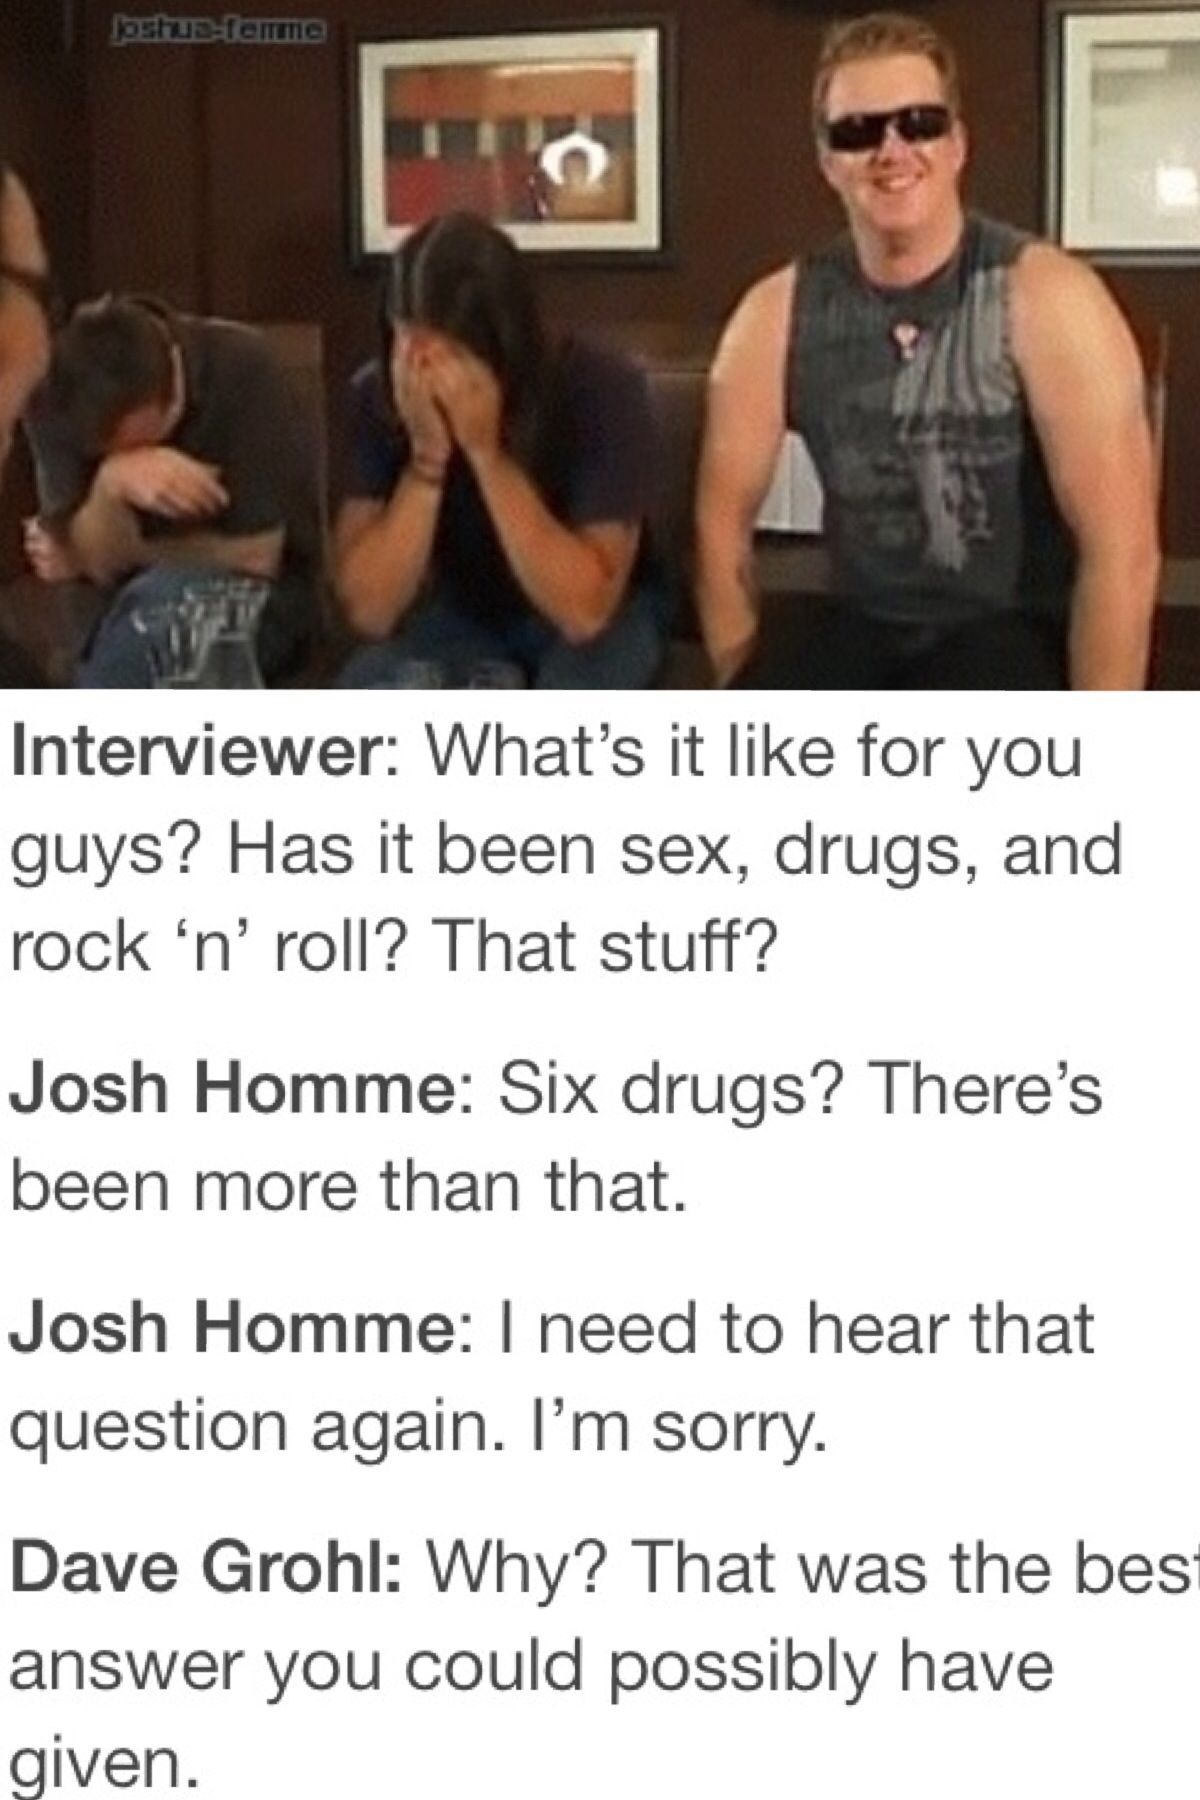 josh homme six drugs - Jostefemme Interviewer What's it for you guys? Has it been sex, drugs, and rock 'n' roll? That stuff? Josh Homme Six drugs? There's been more than that. Josh Homme I need to hear that question again. I'm sorry. Dave Grohl Why? That 